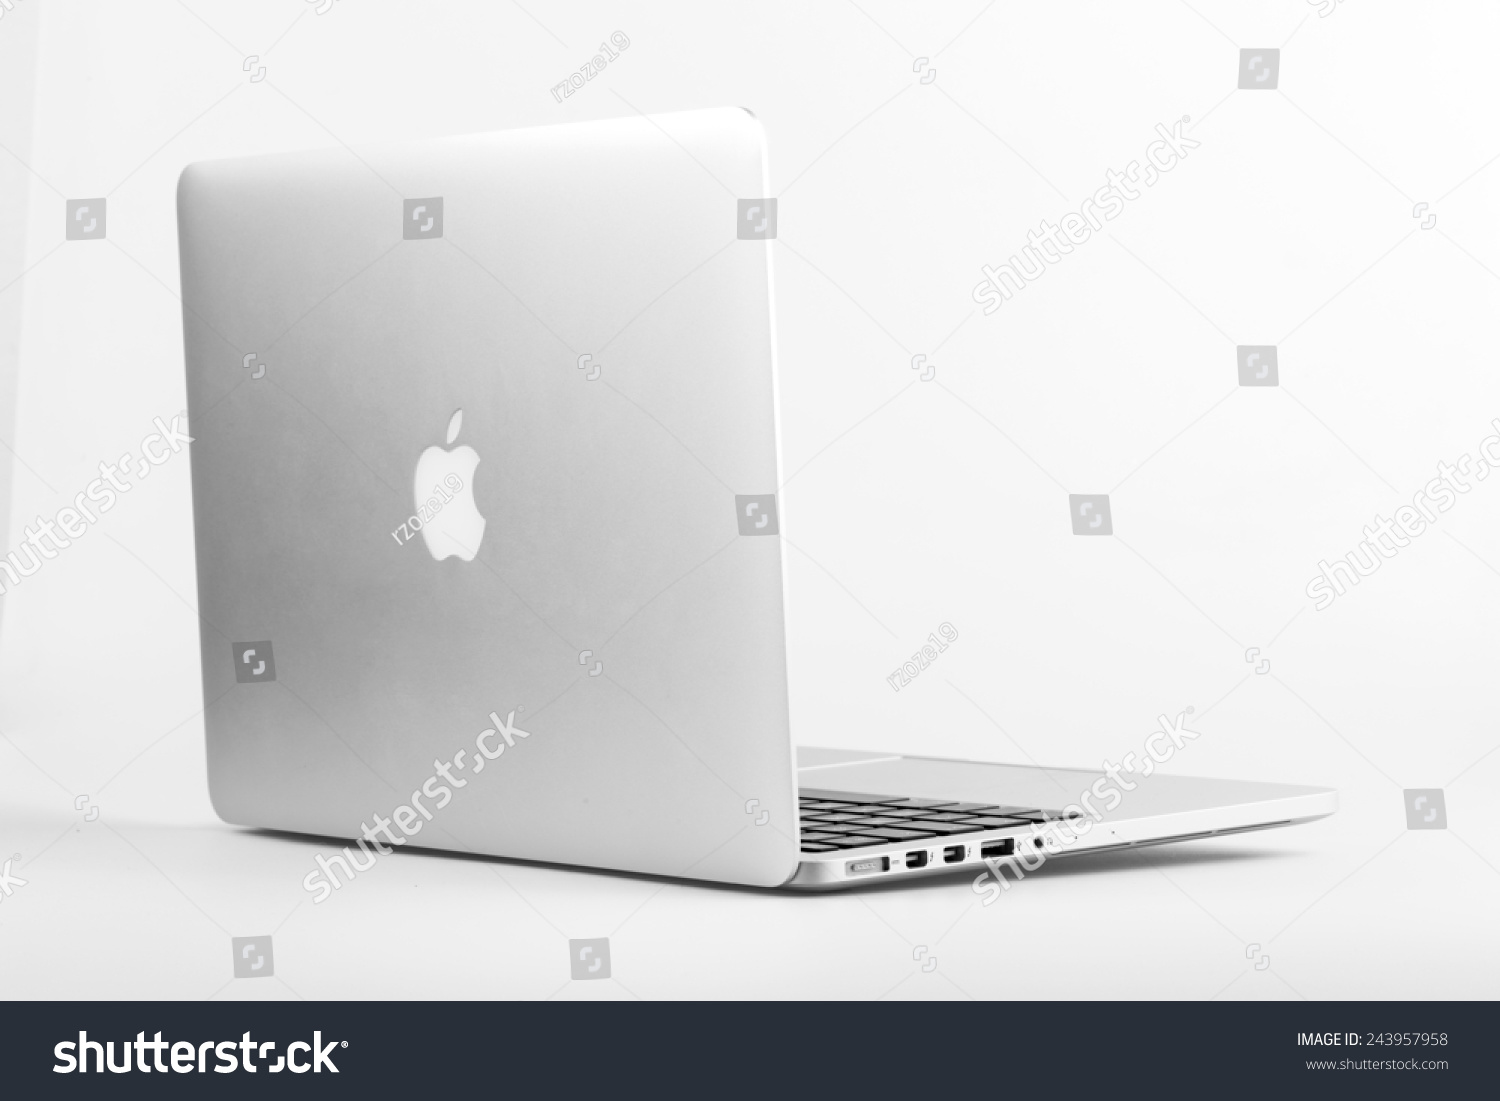 195 Back of macbook Stock Photos, Images & Photography | Shutterstock